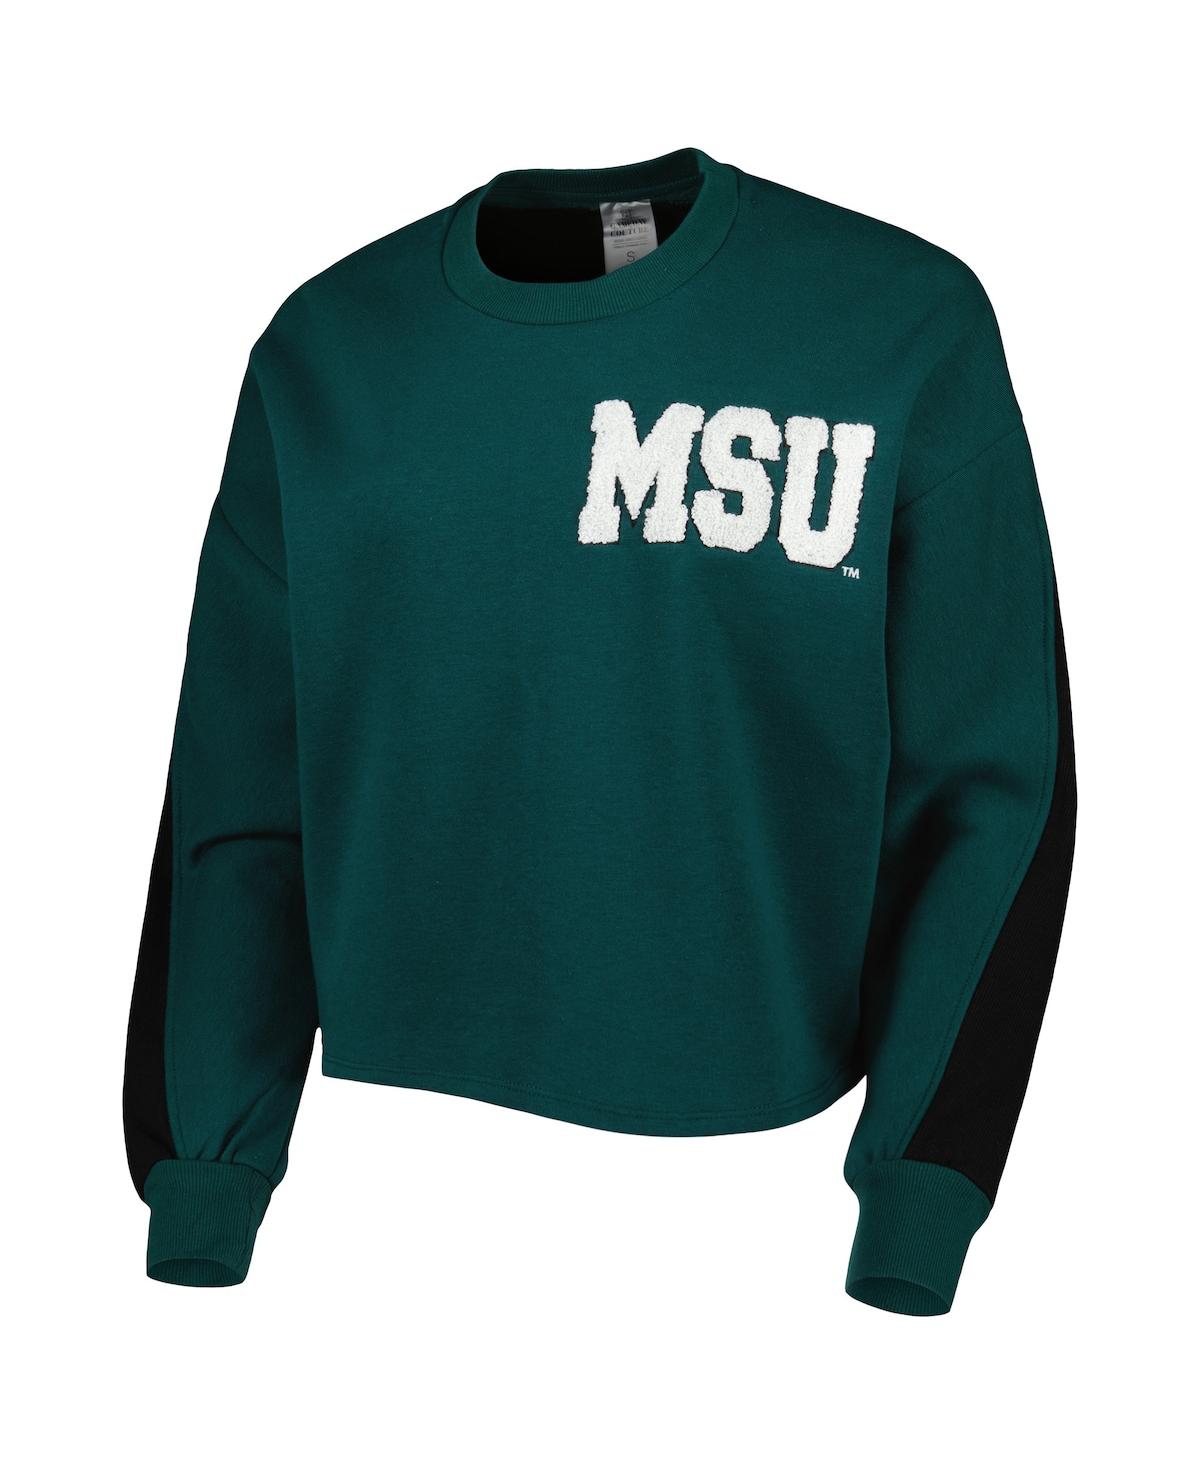 Shop Gameday Couture Women's  Green Michigan State Spartans Back To Reality Colorblock Pullover Sweatshirt